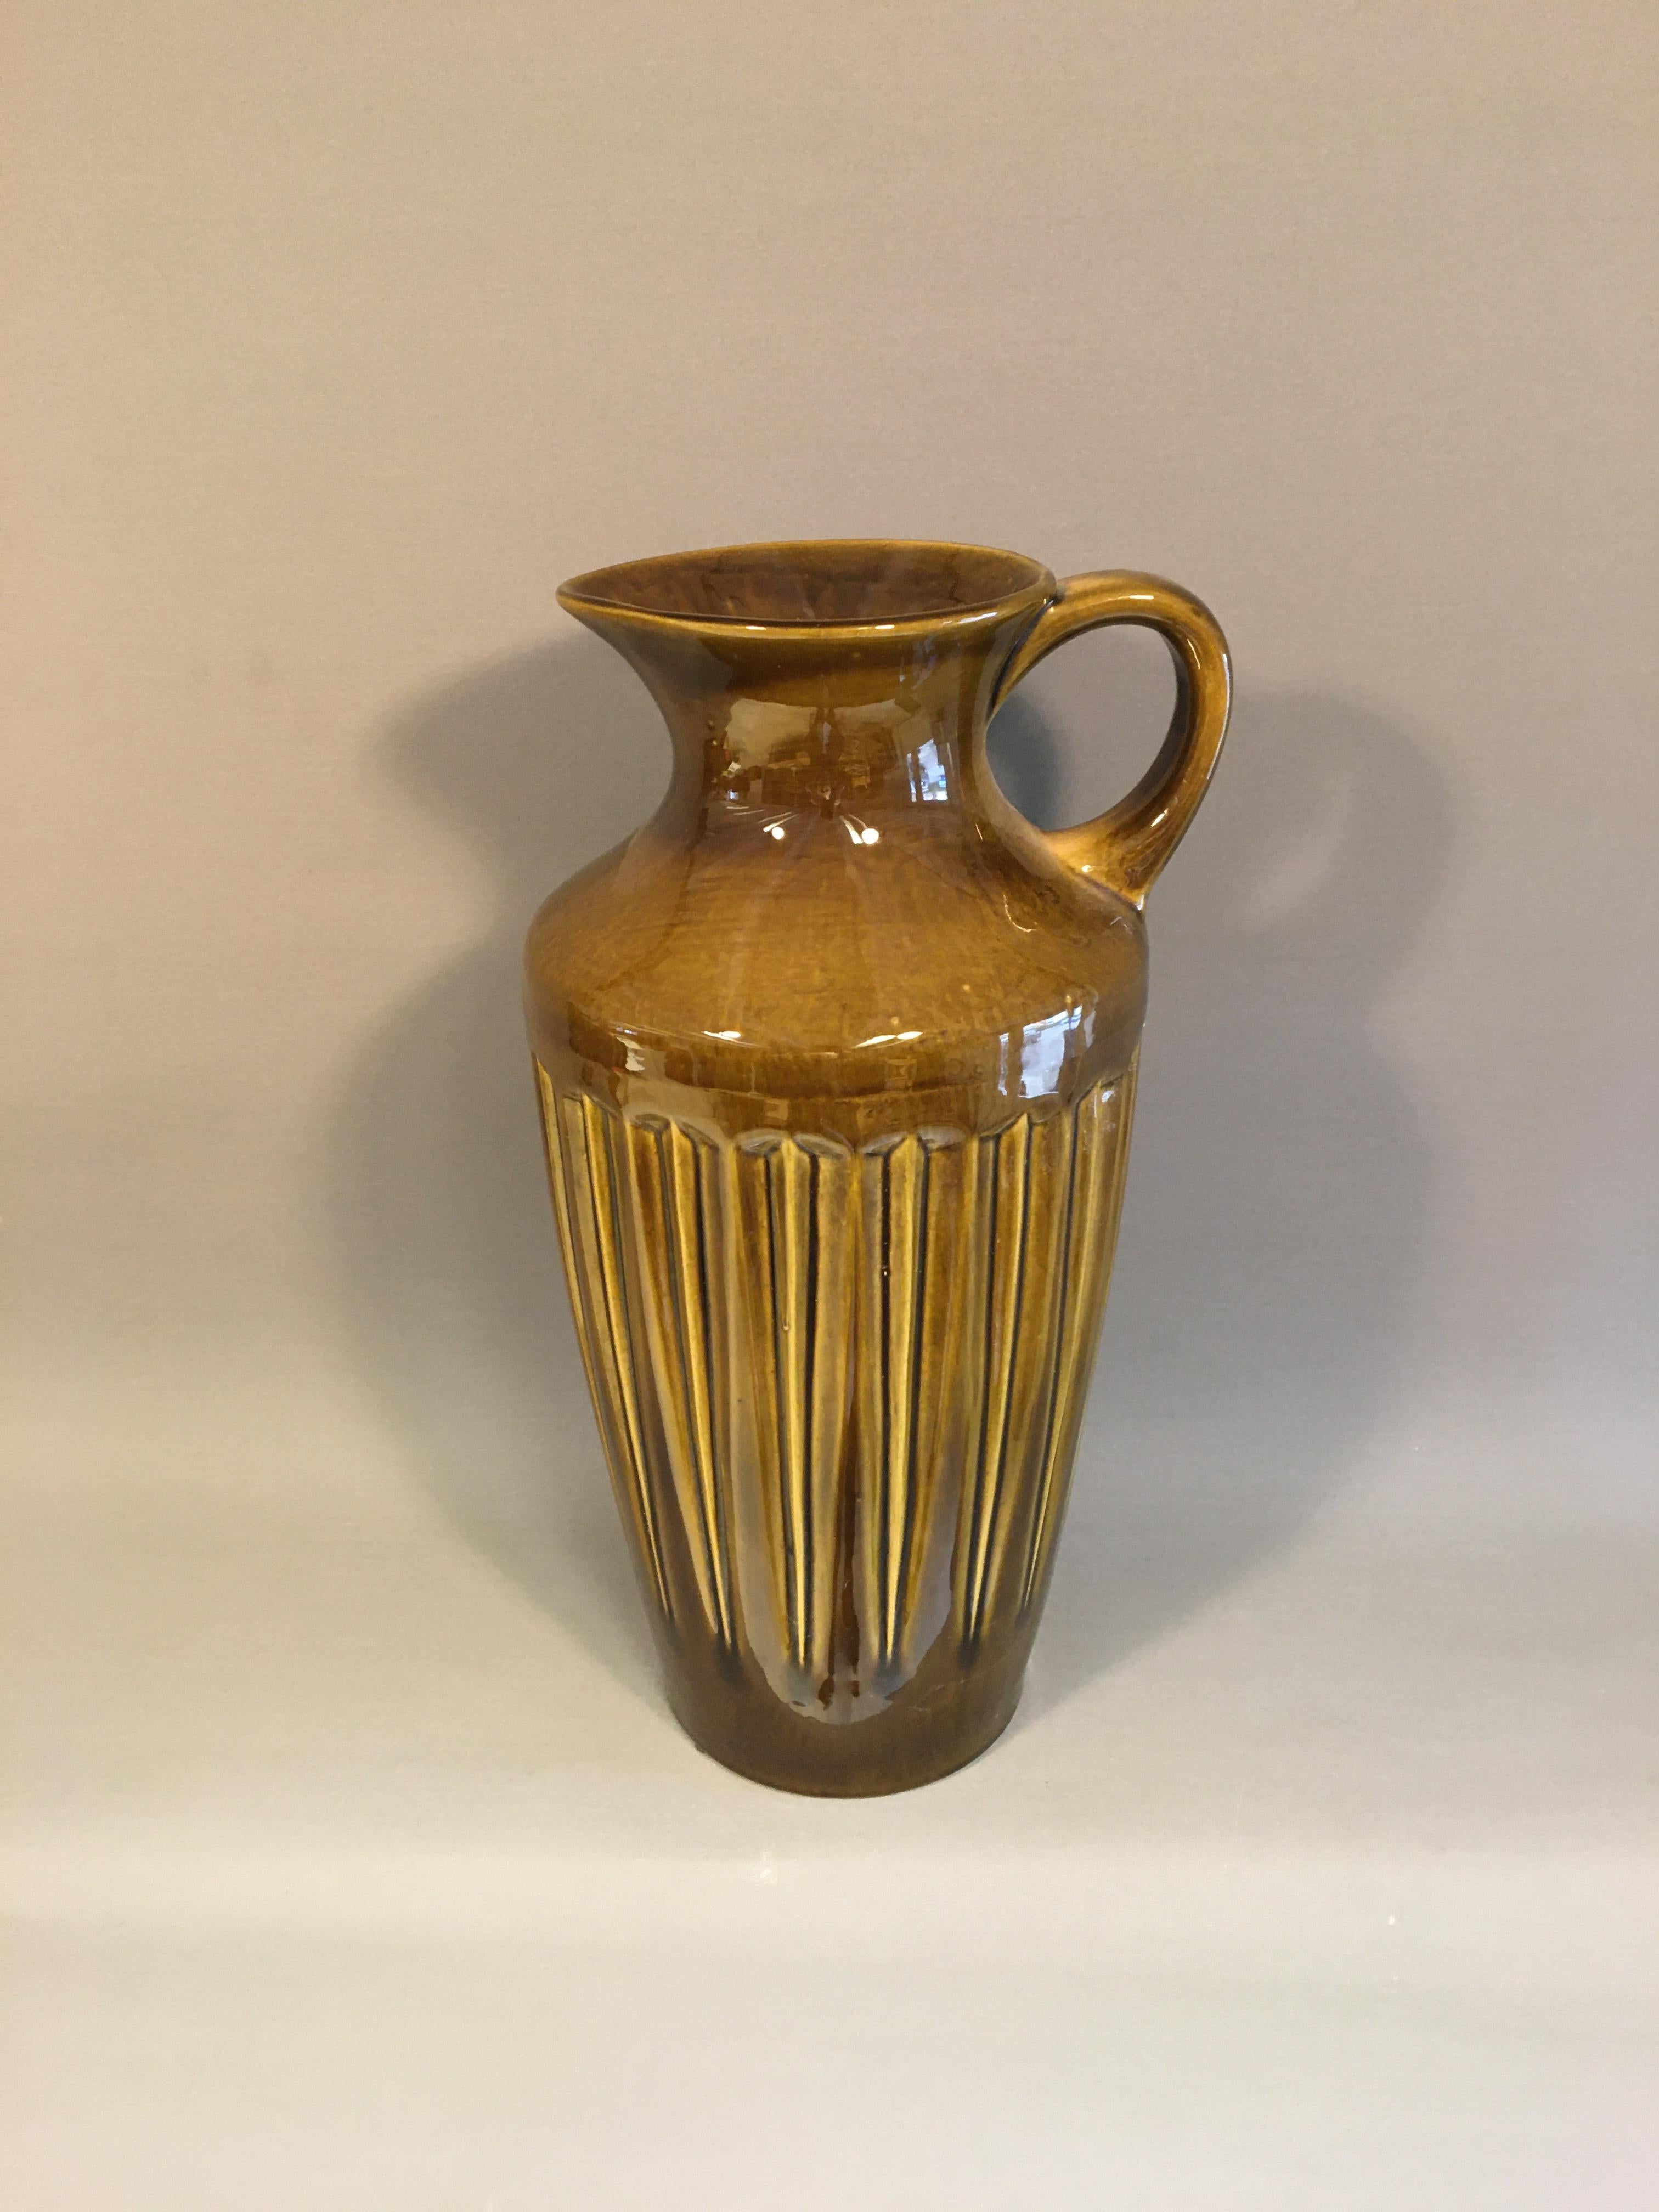 Large nice floor vase / jug with green glaze by Bay West Germany, 1960.
The vase is without notches or cracks, made by Bay West Germany.
Measures: H 36 cm, Ø 18 cm.